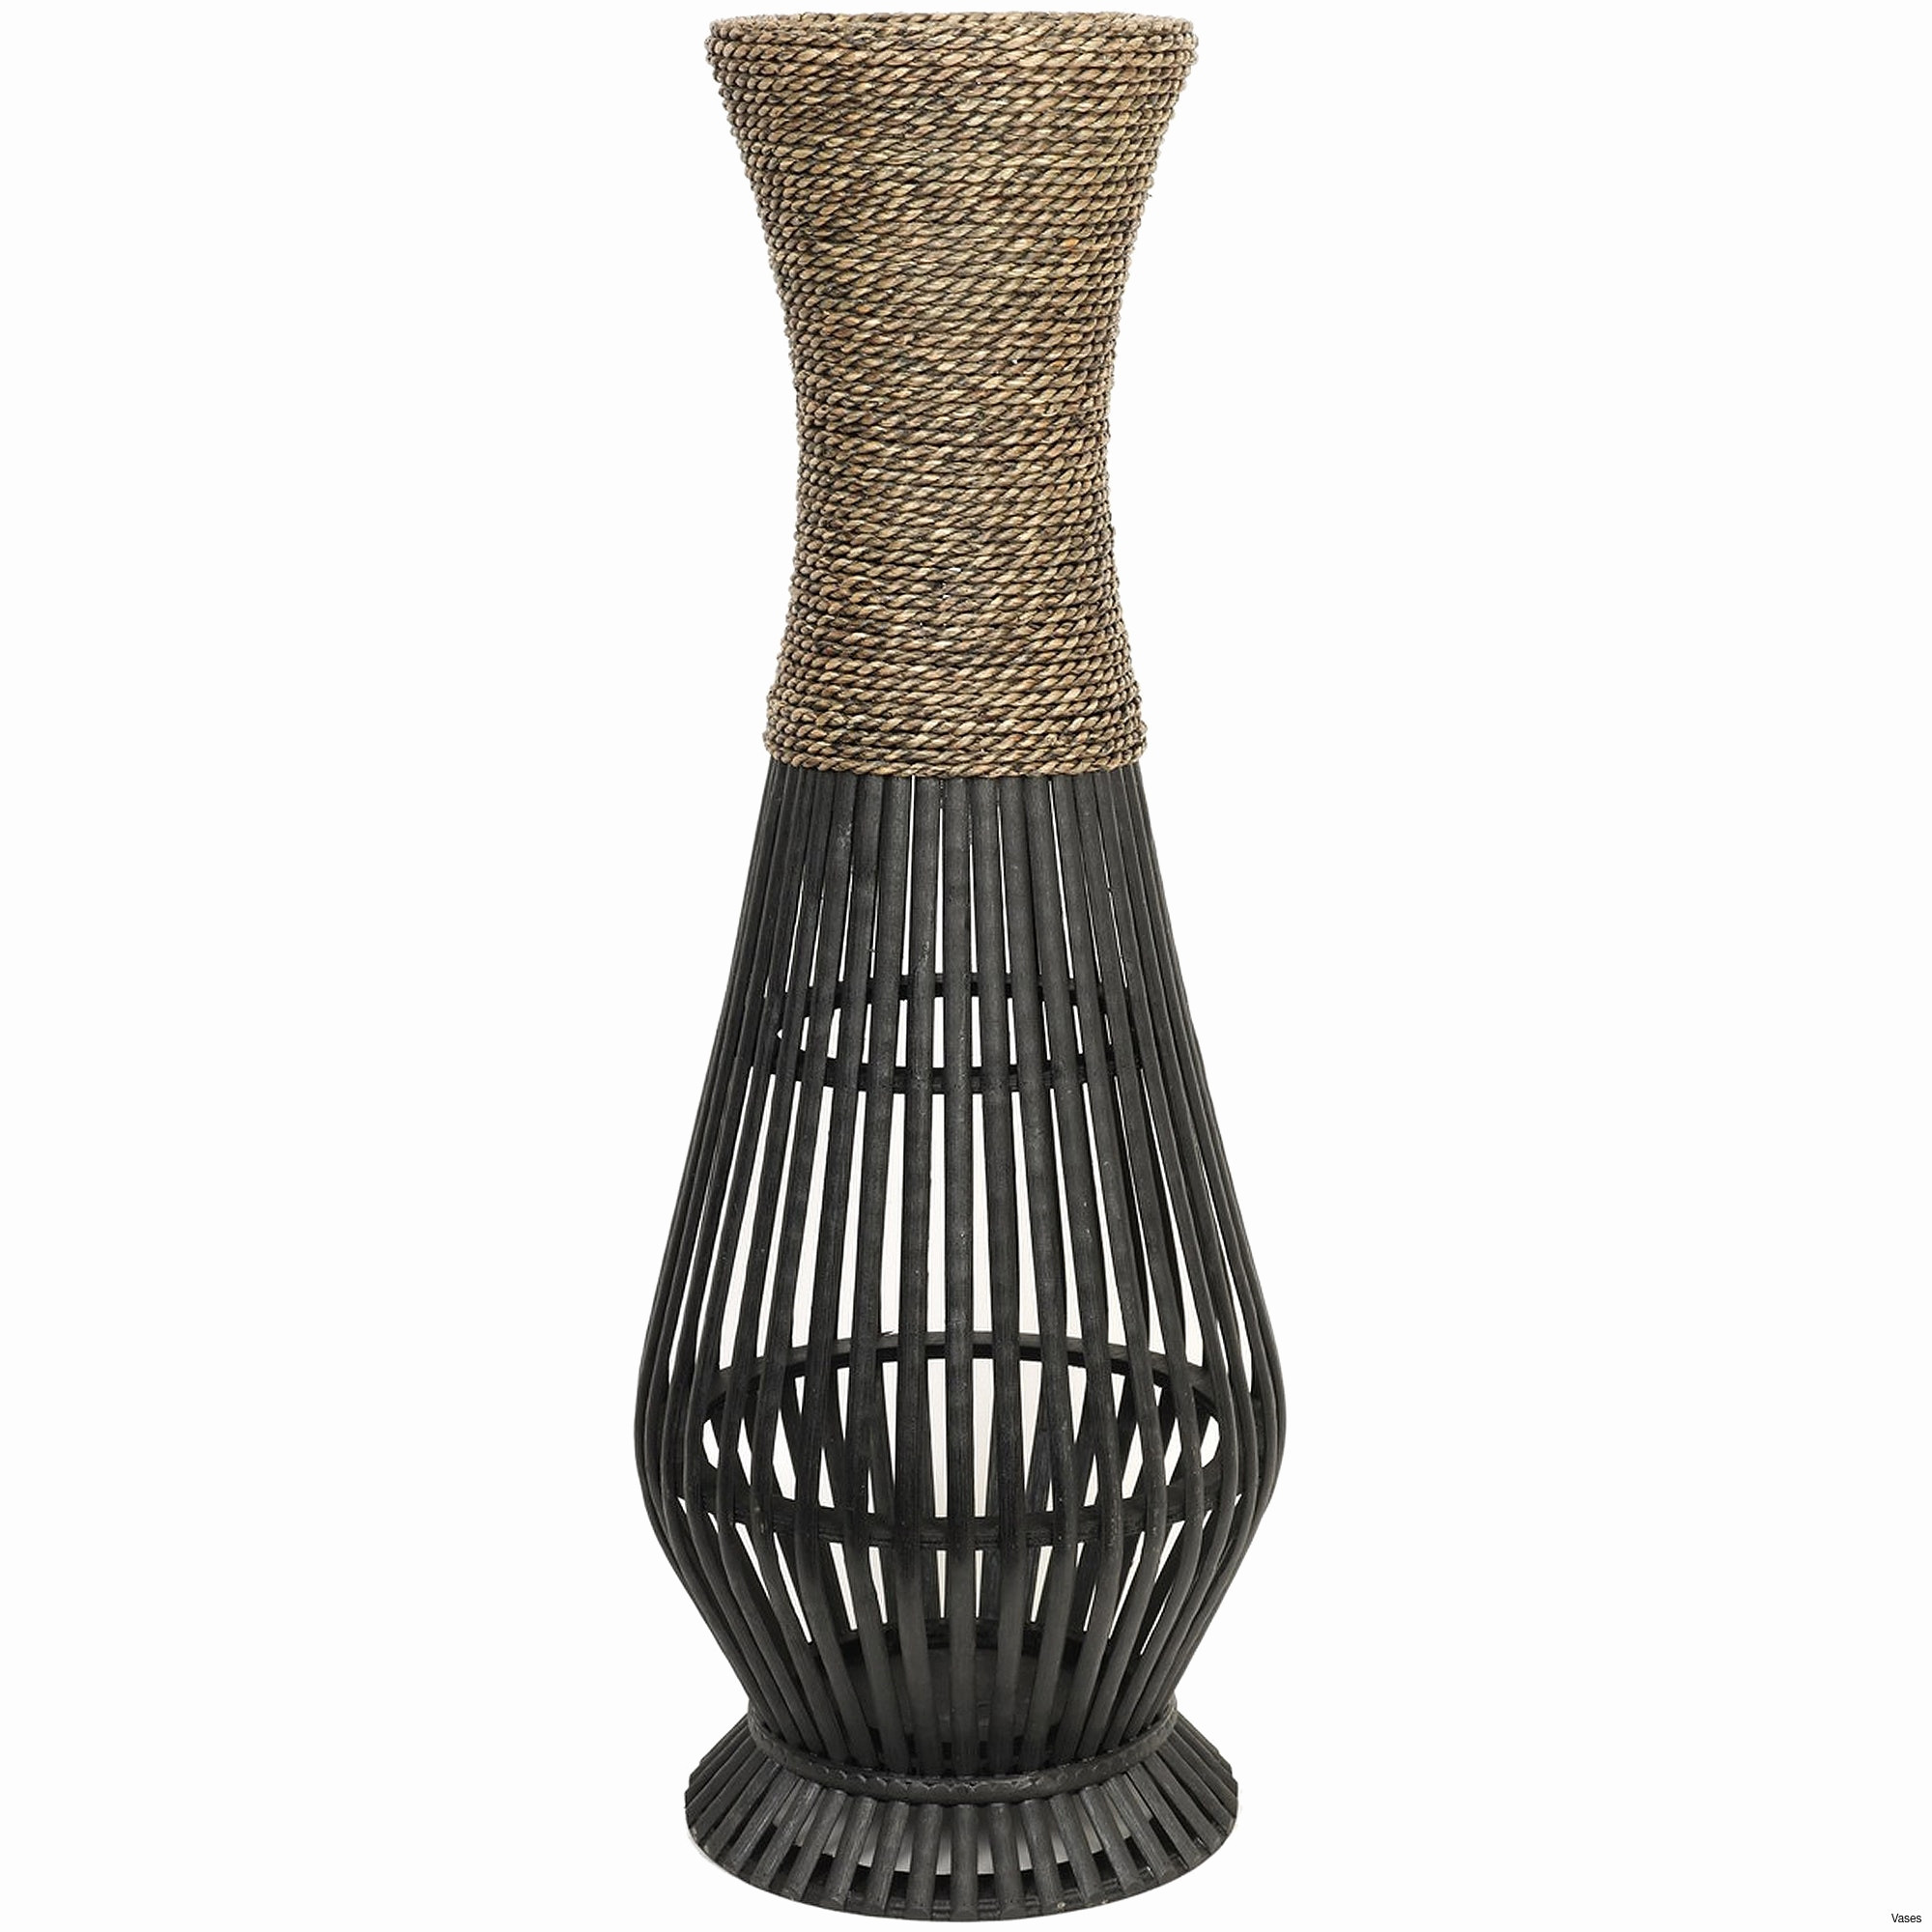 26 Recommended Tall Black Vases for Sale 2024 free download tall black vases for sale of 24 beautiful large floor vase decoration ideas accroalamode with regard to large floor vase decoration ideas unique home decor vases unique d dkbrw 5743 1h vases